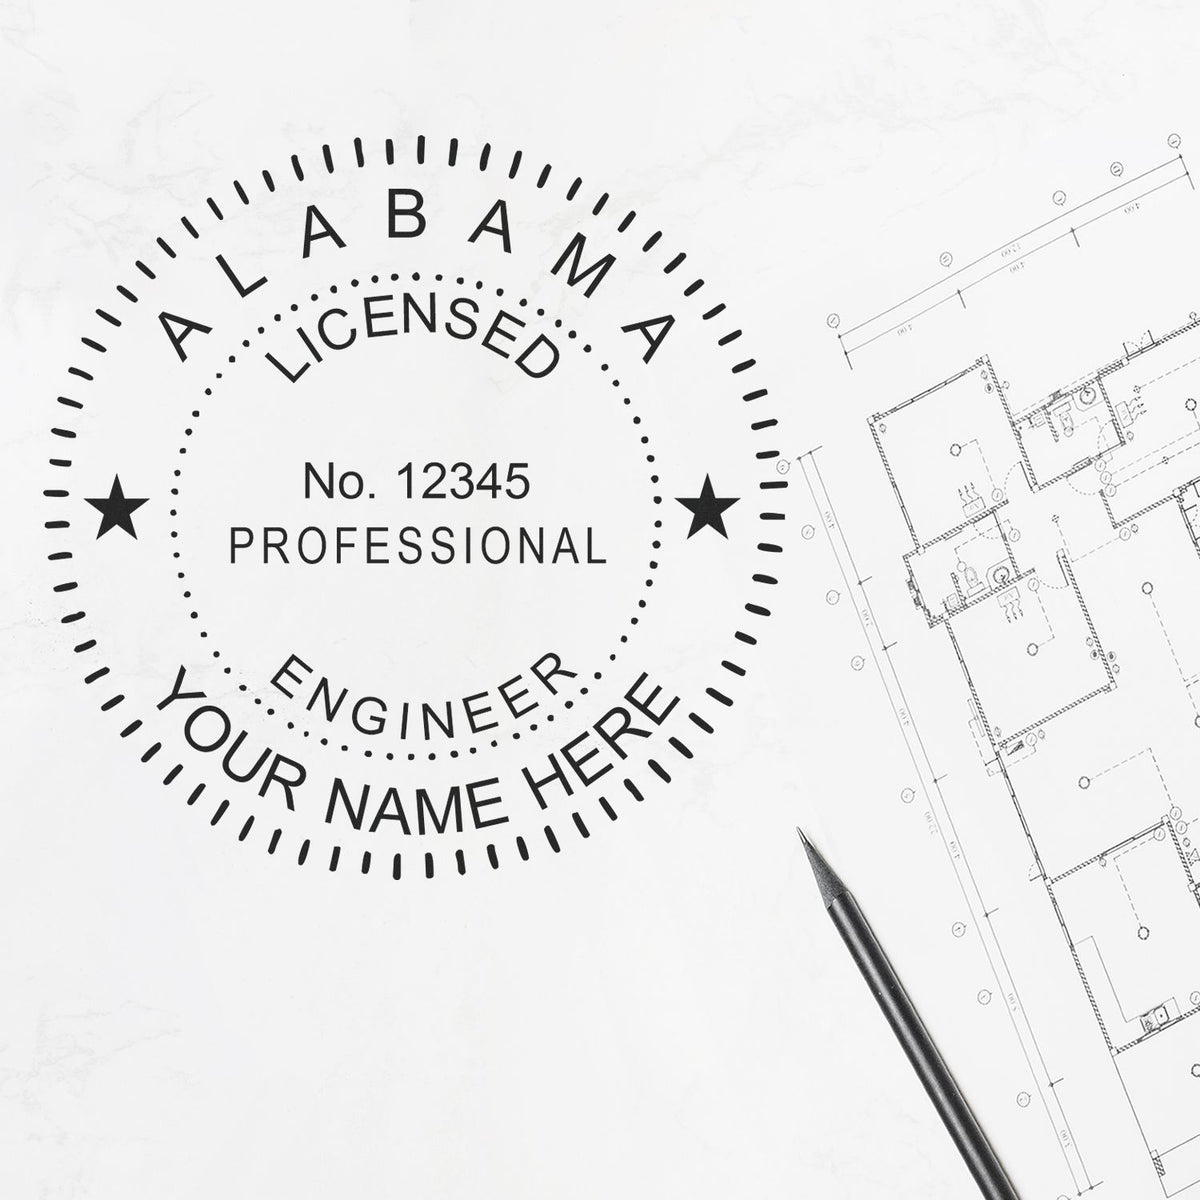 This paper is stamped with a sample imprint of the Alabama Professional Engineer Seal Stamp, signifying its quality and reliability.